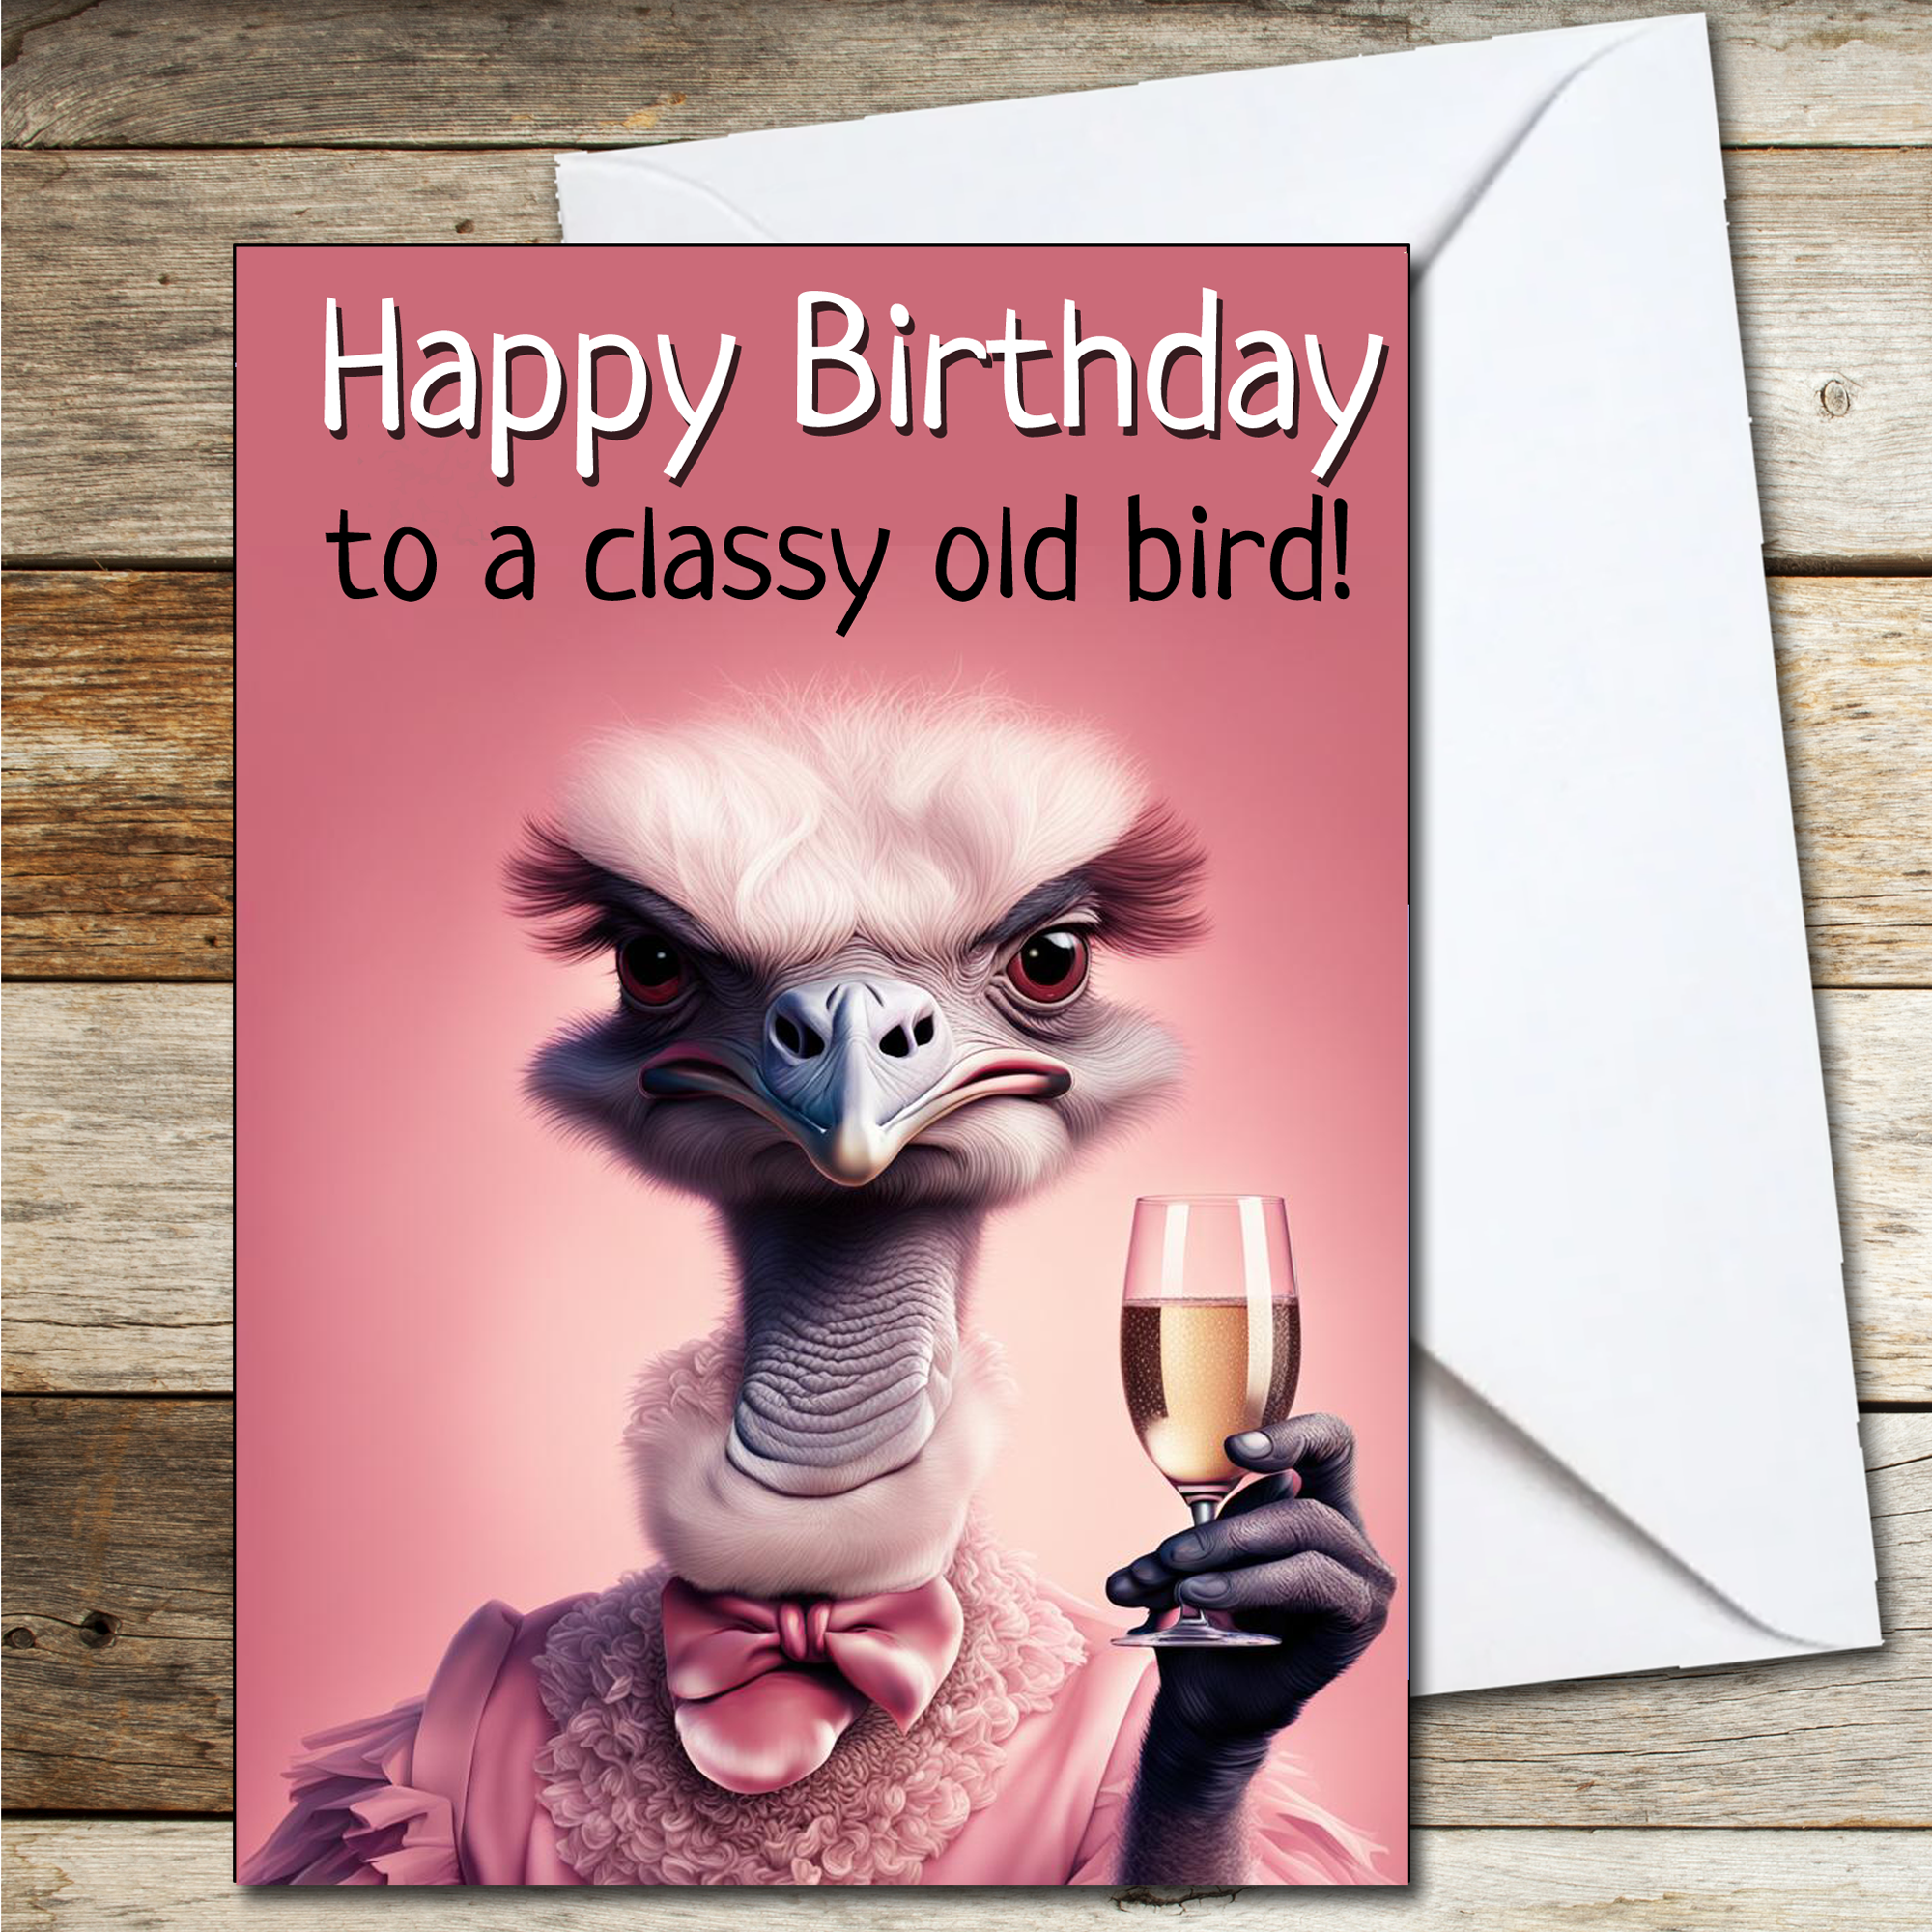 Funny Birthday Cards for Her 'Happy Birthday To A Classy Old Bird' For Wife Sister or Friend